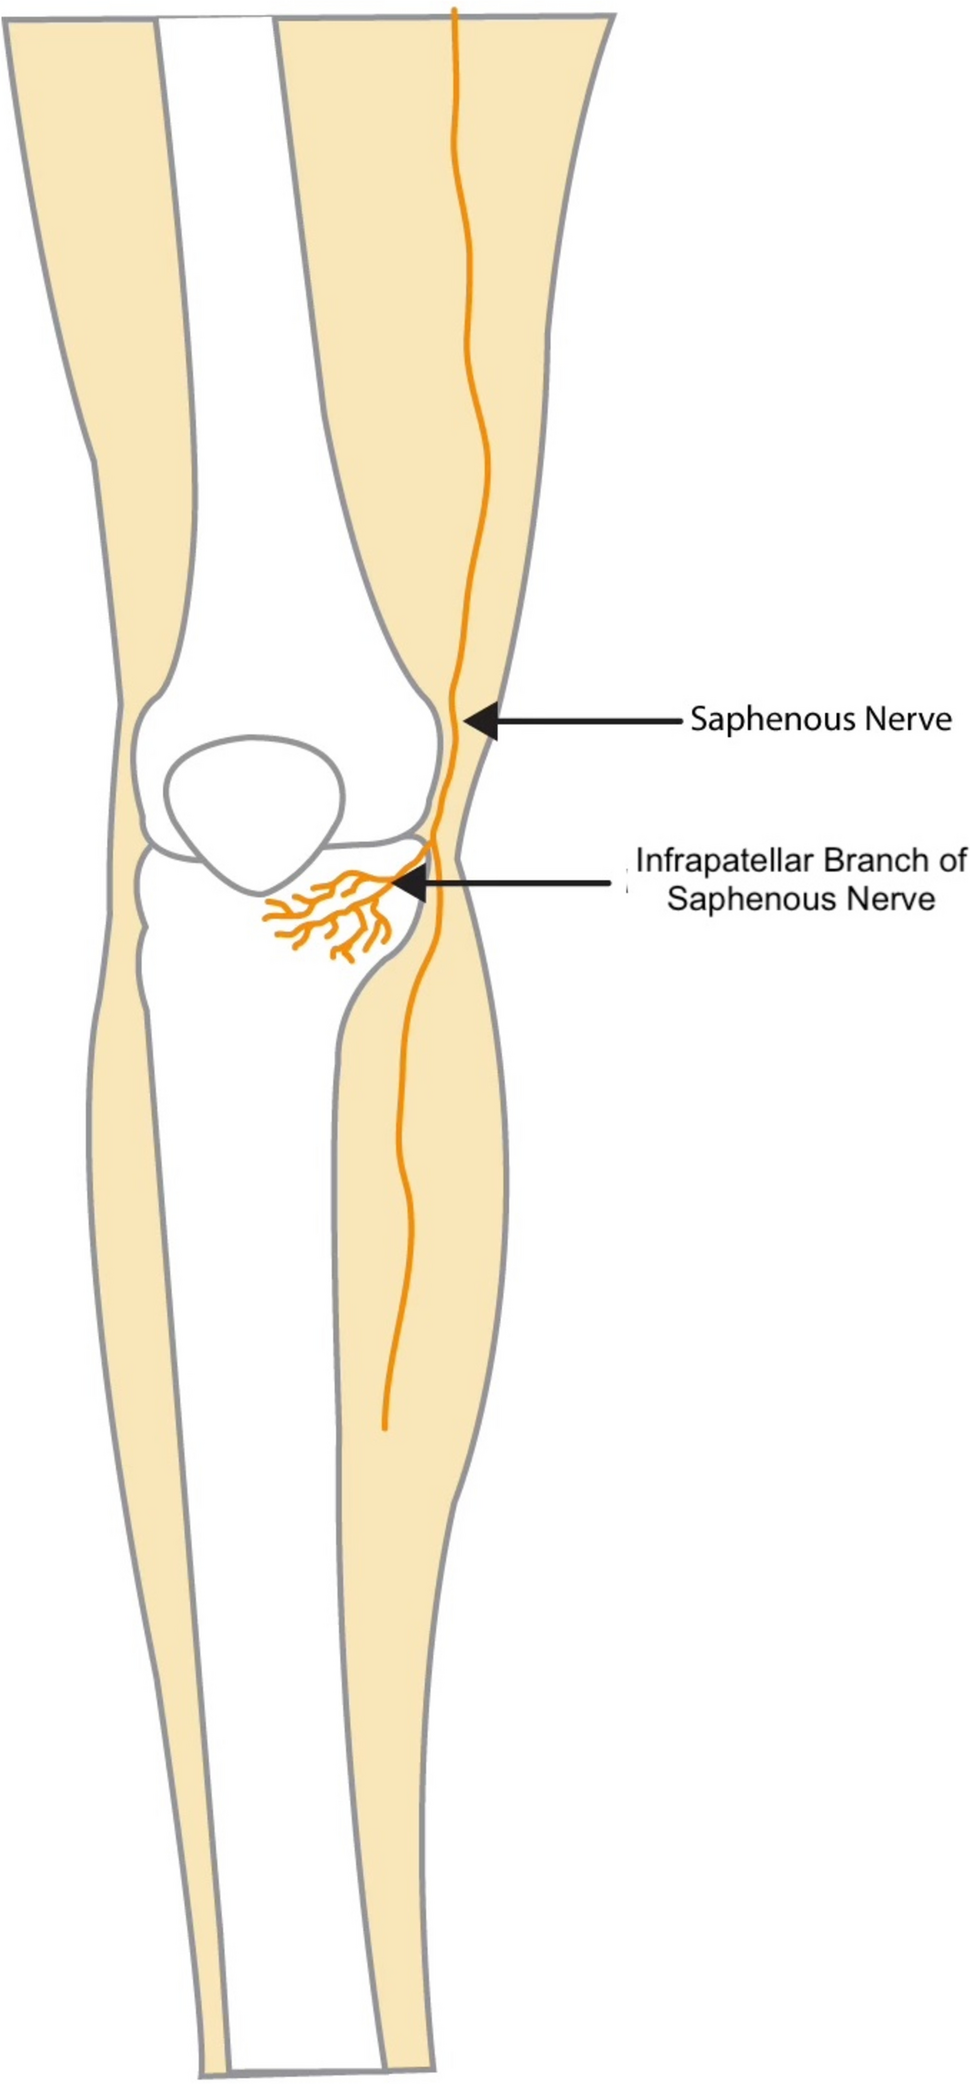 Infrapatellar Branch of the Saphenous Nerve: Therapeutic Approaches to Chronic Knee Pain